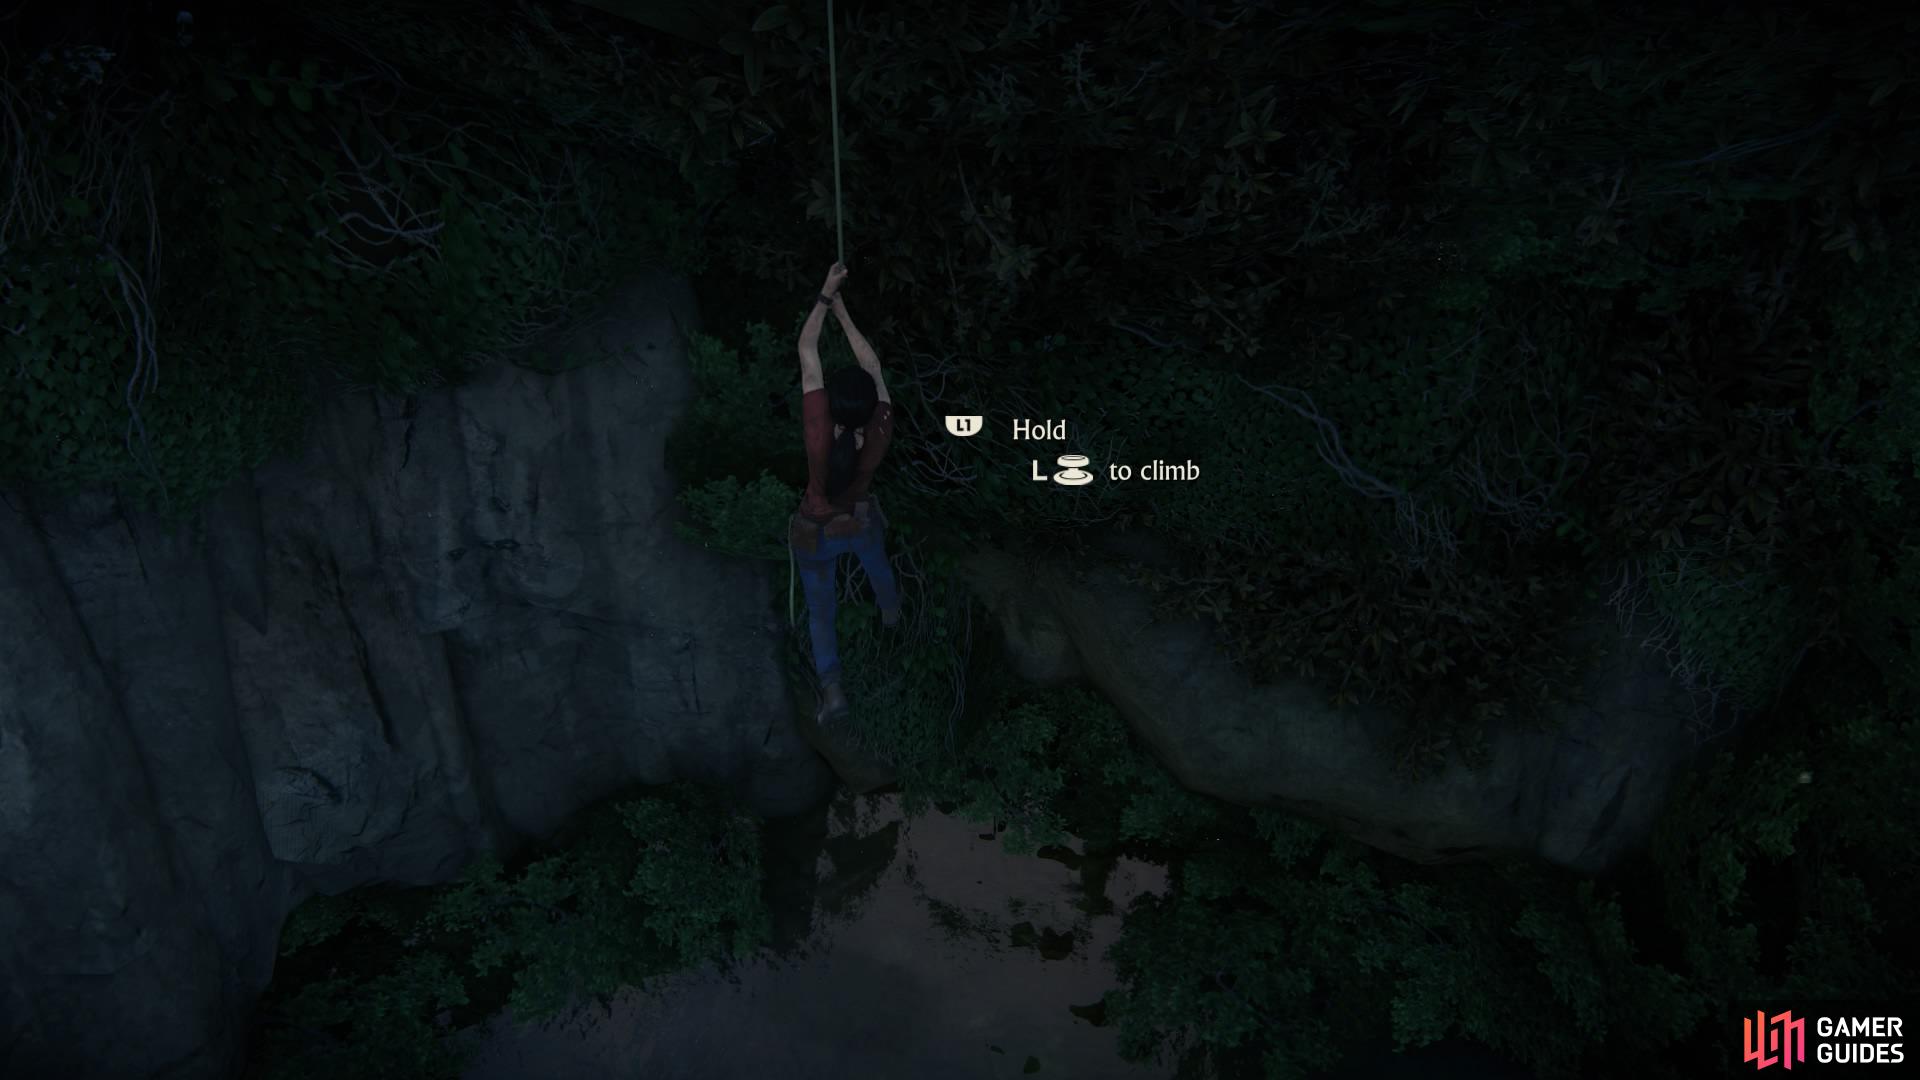 Climb the rope while hanging using L1 and the left analogue stick on the controller